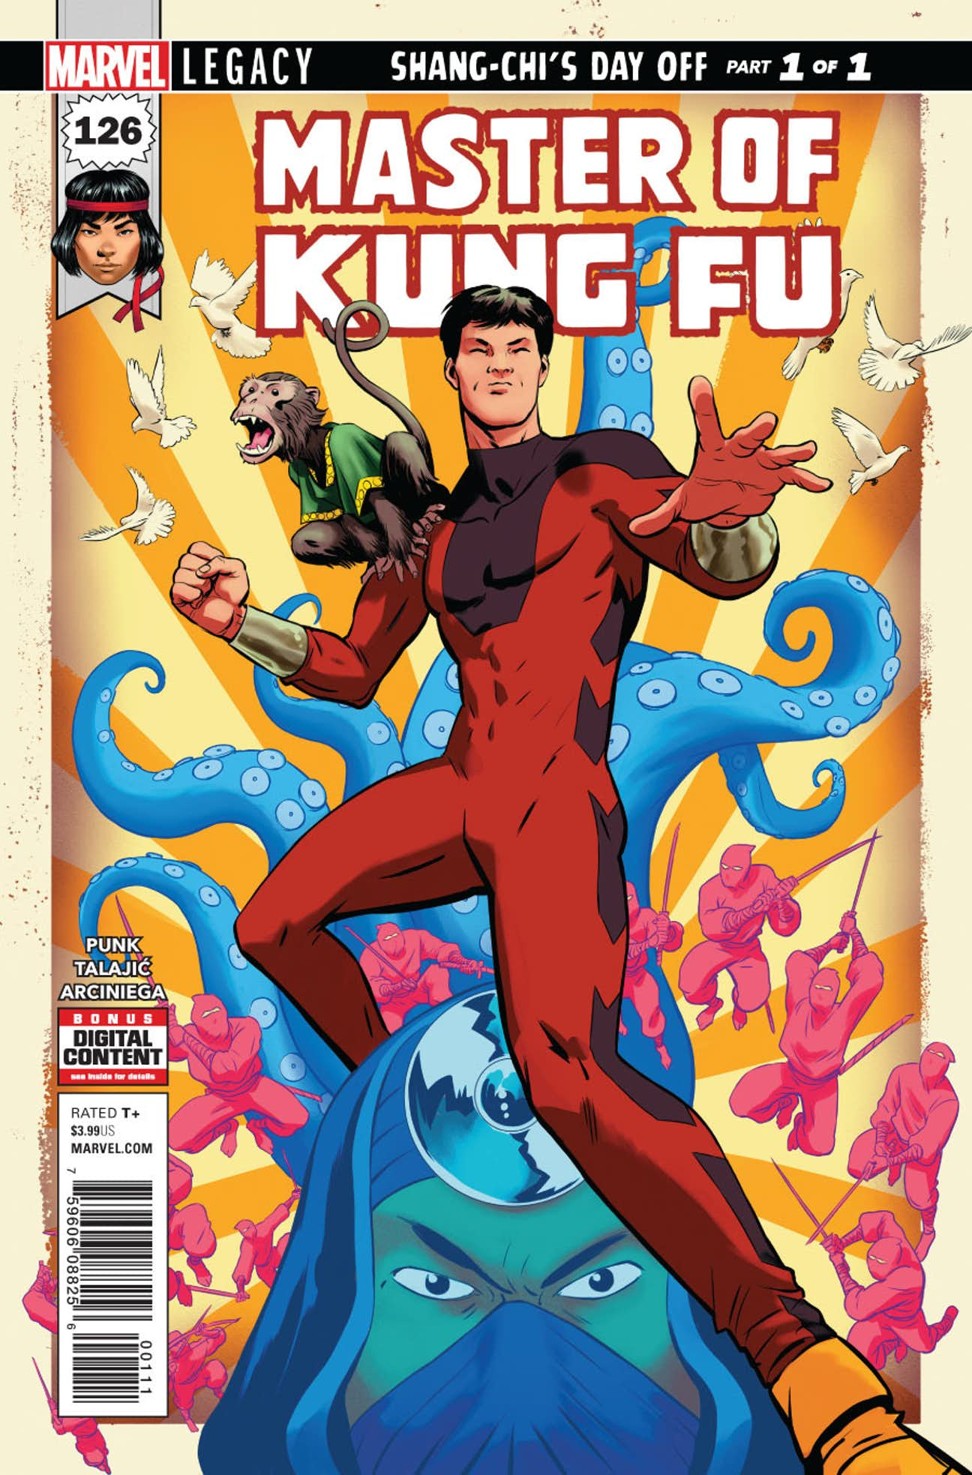 Marvel comic featuring Shang-Chi, Master of Kung Fu, whose origin story has caused online fury in China. Photo: Handout